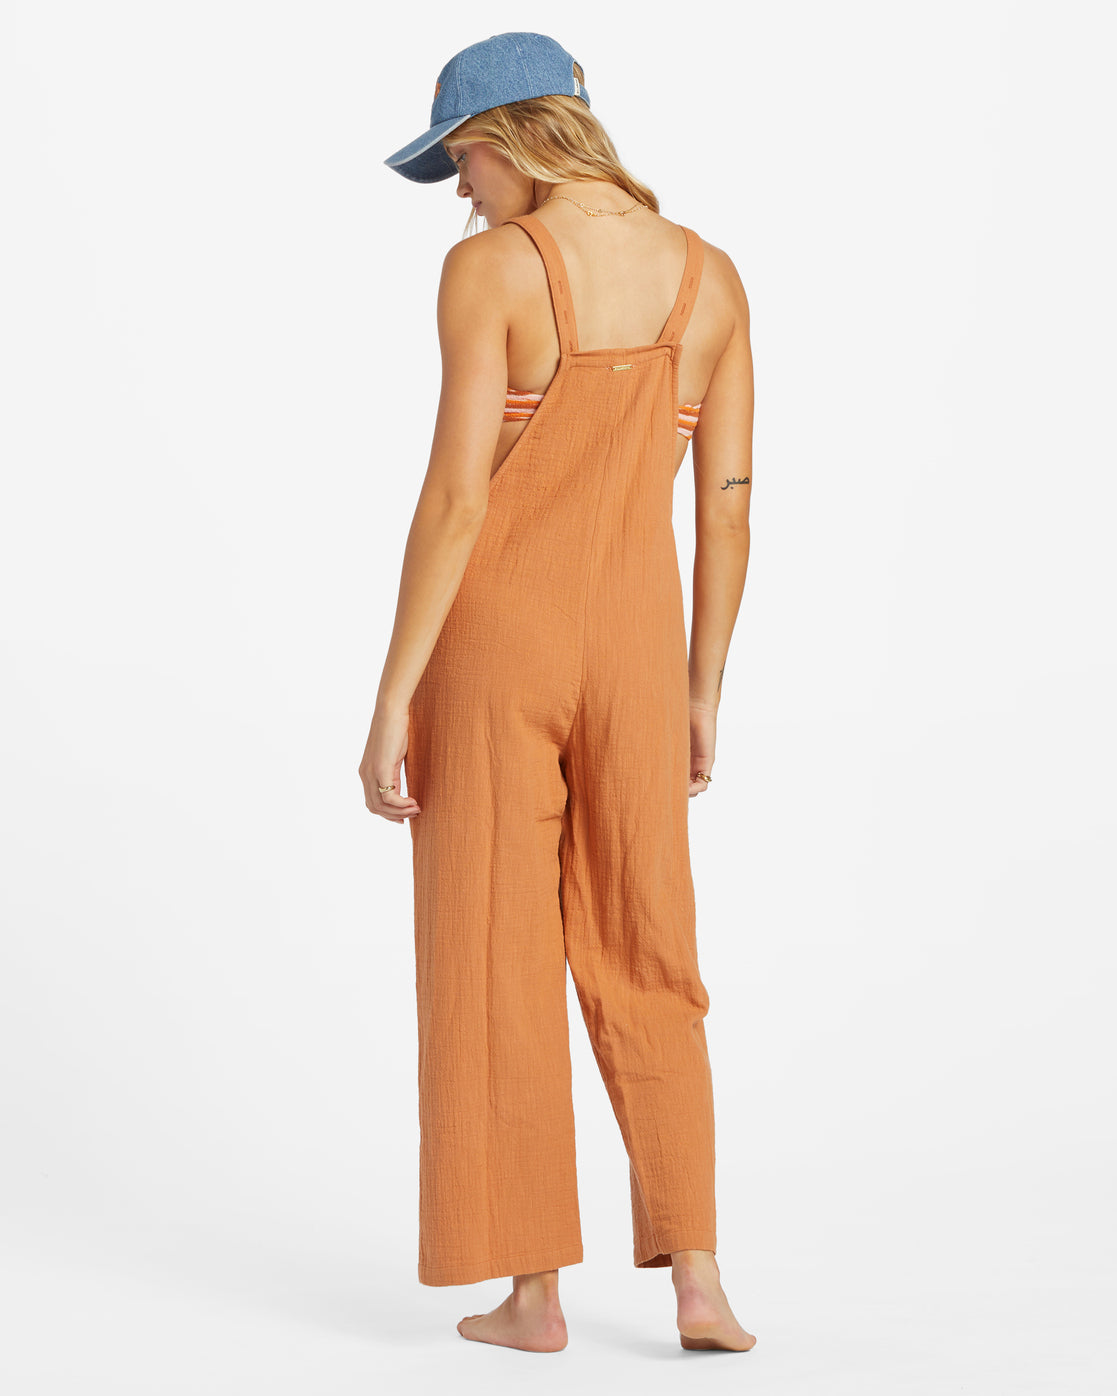 Pacific Time Strappy Jumpsuit